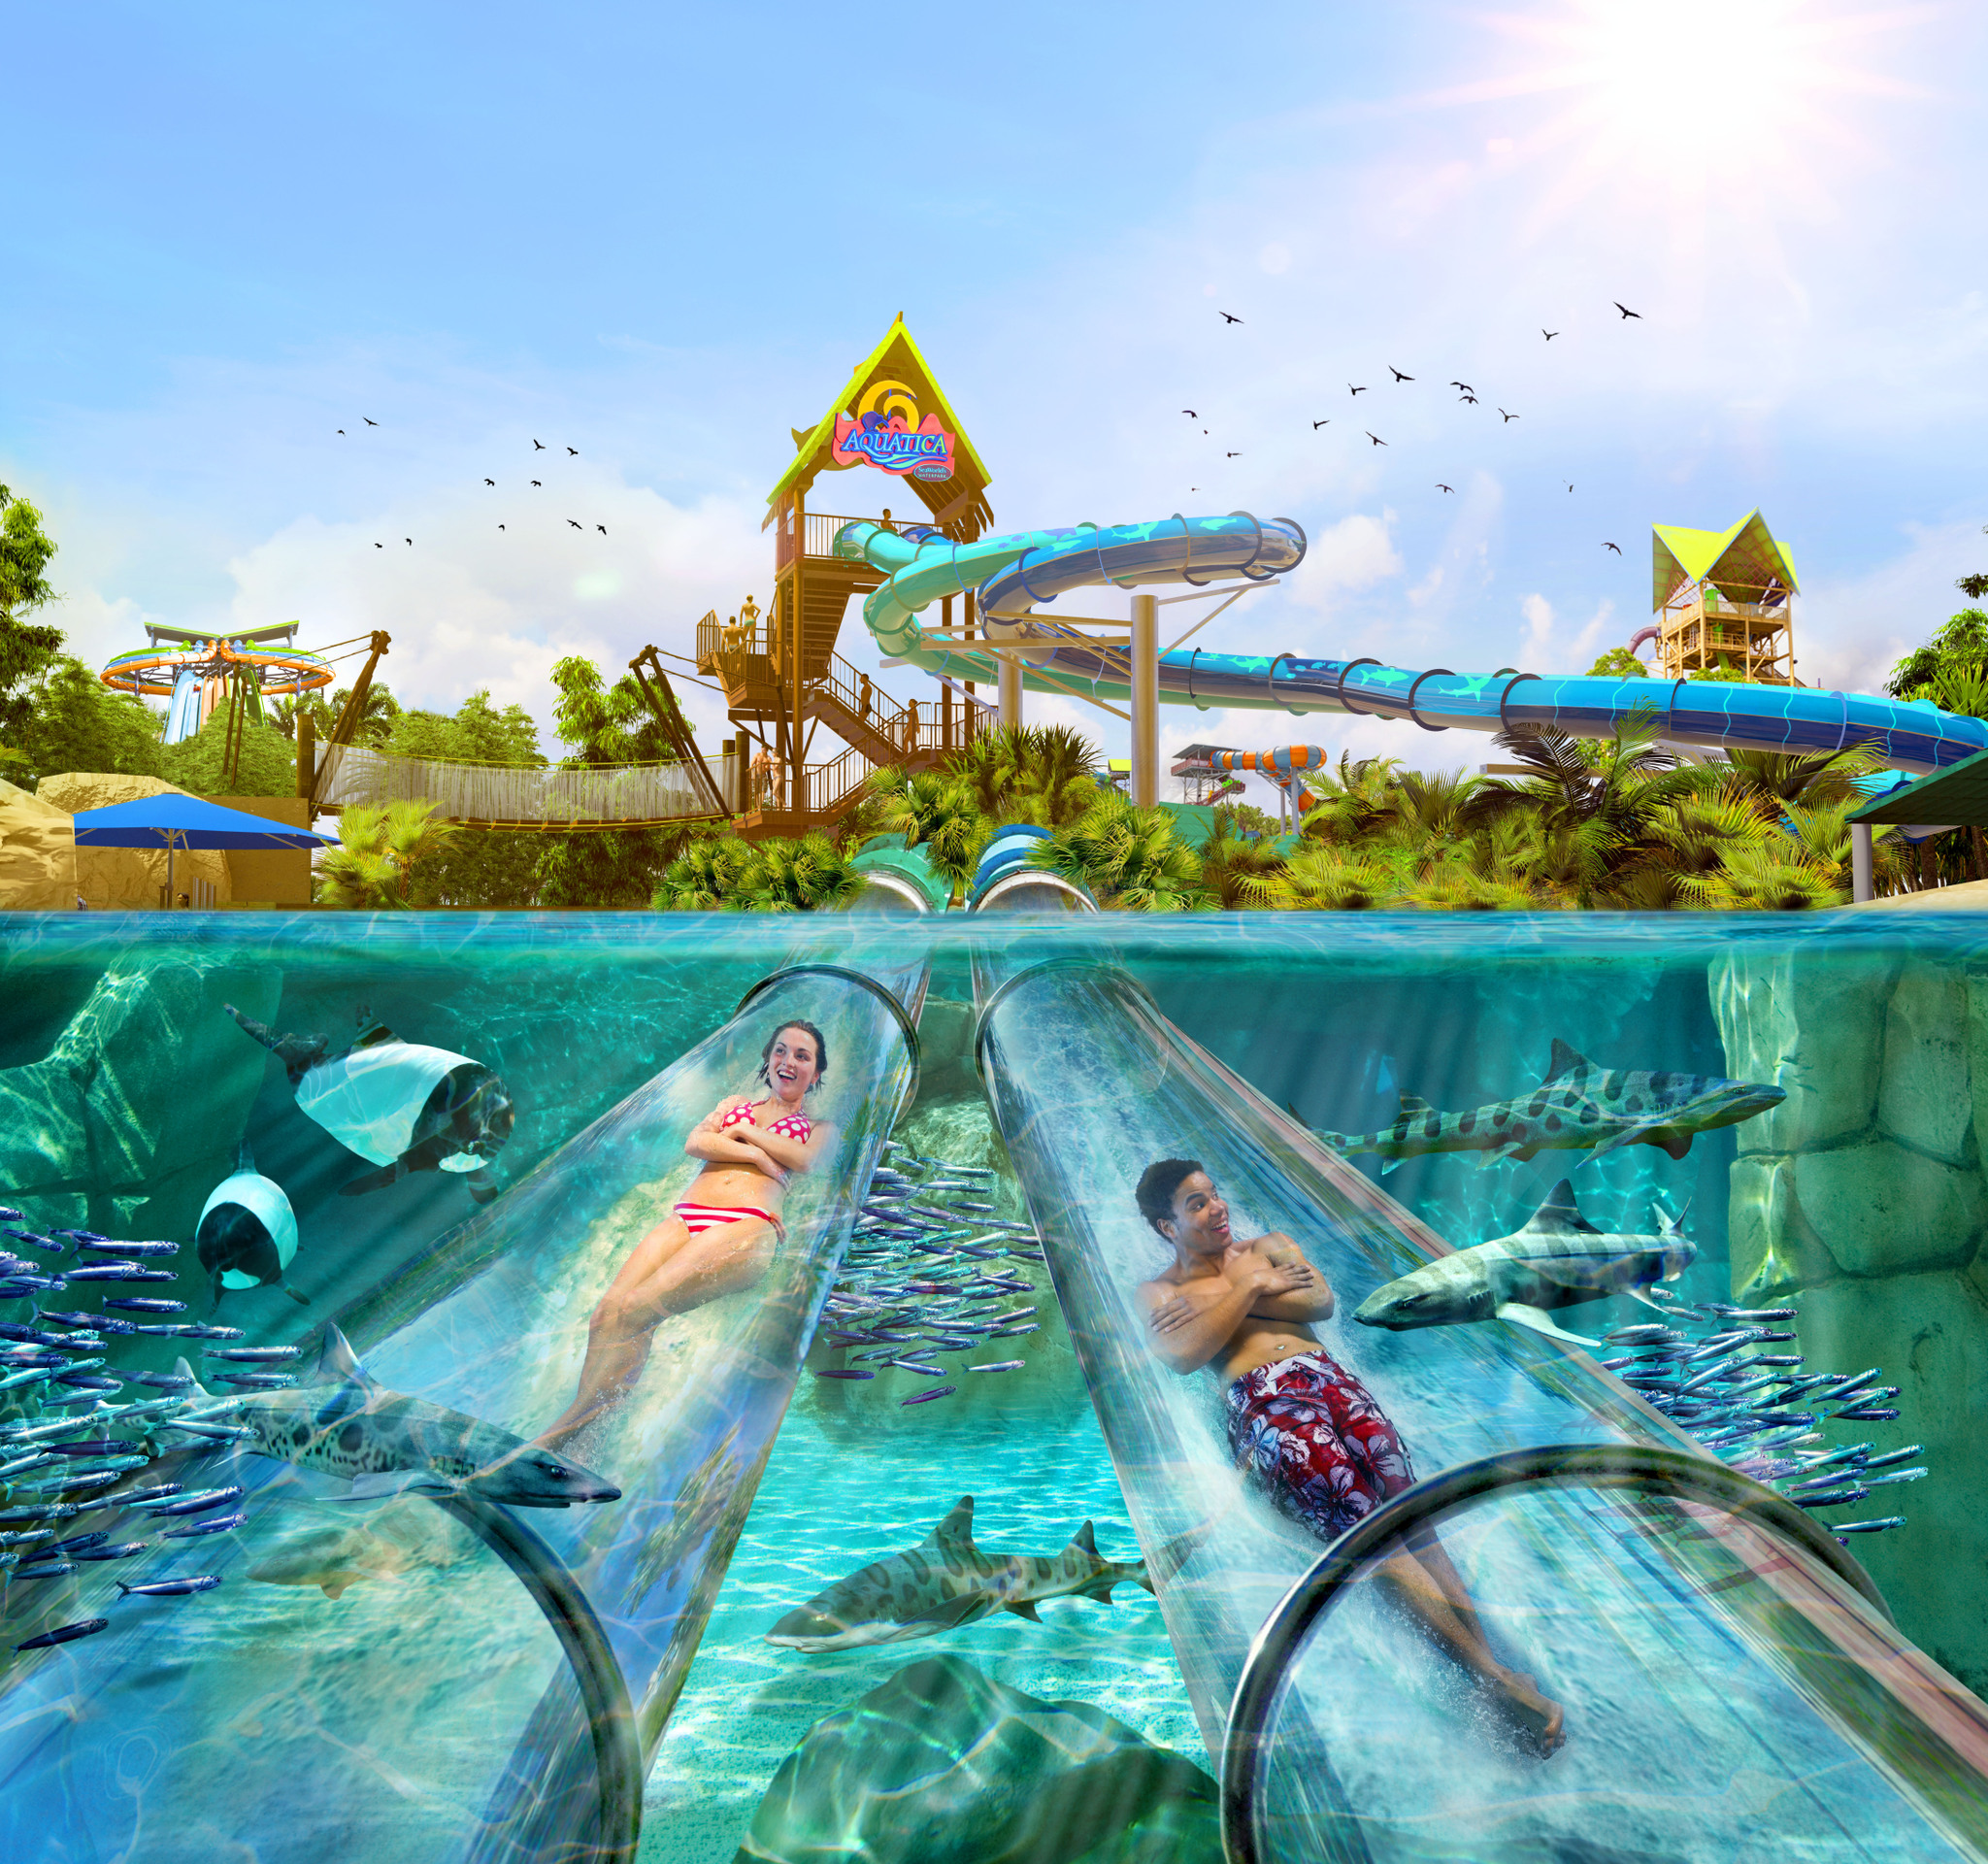 Aquatica Orlando announces new slide, Reef Pluge, along with parkwide